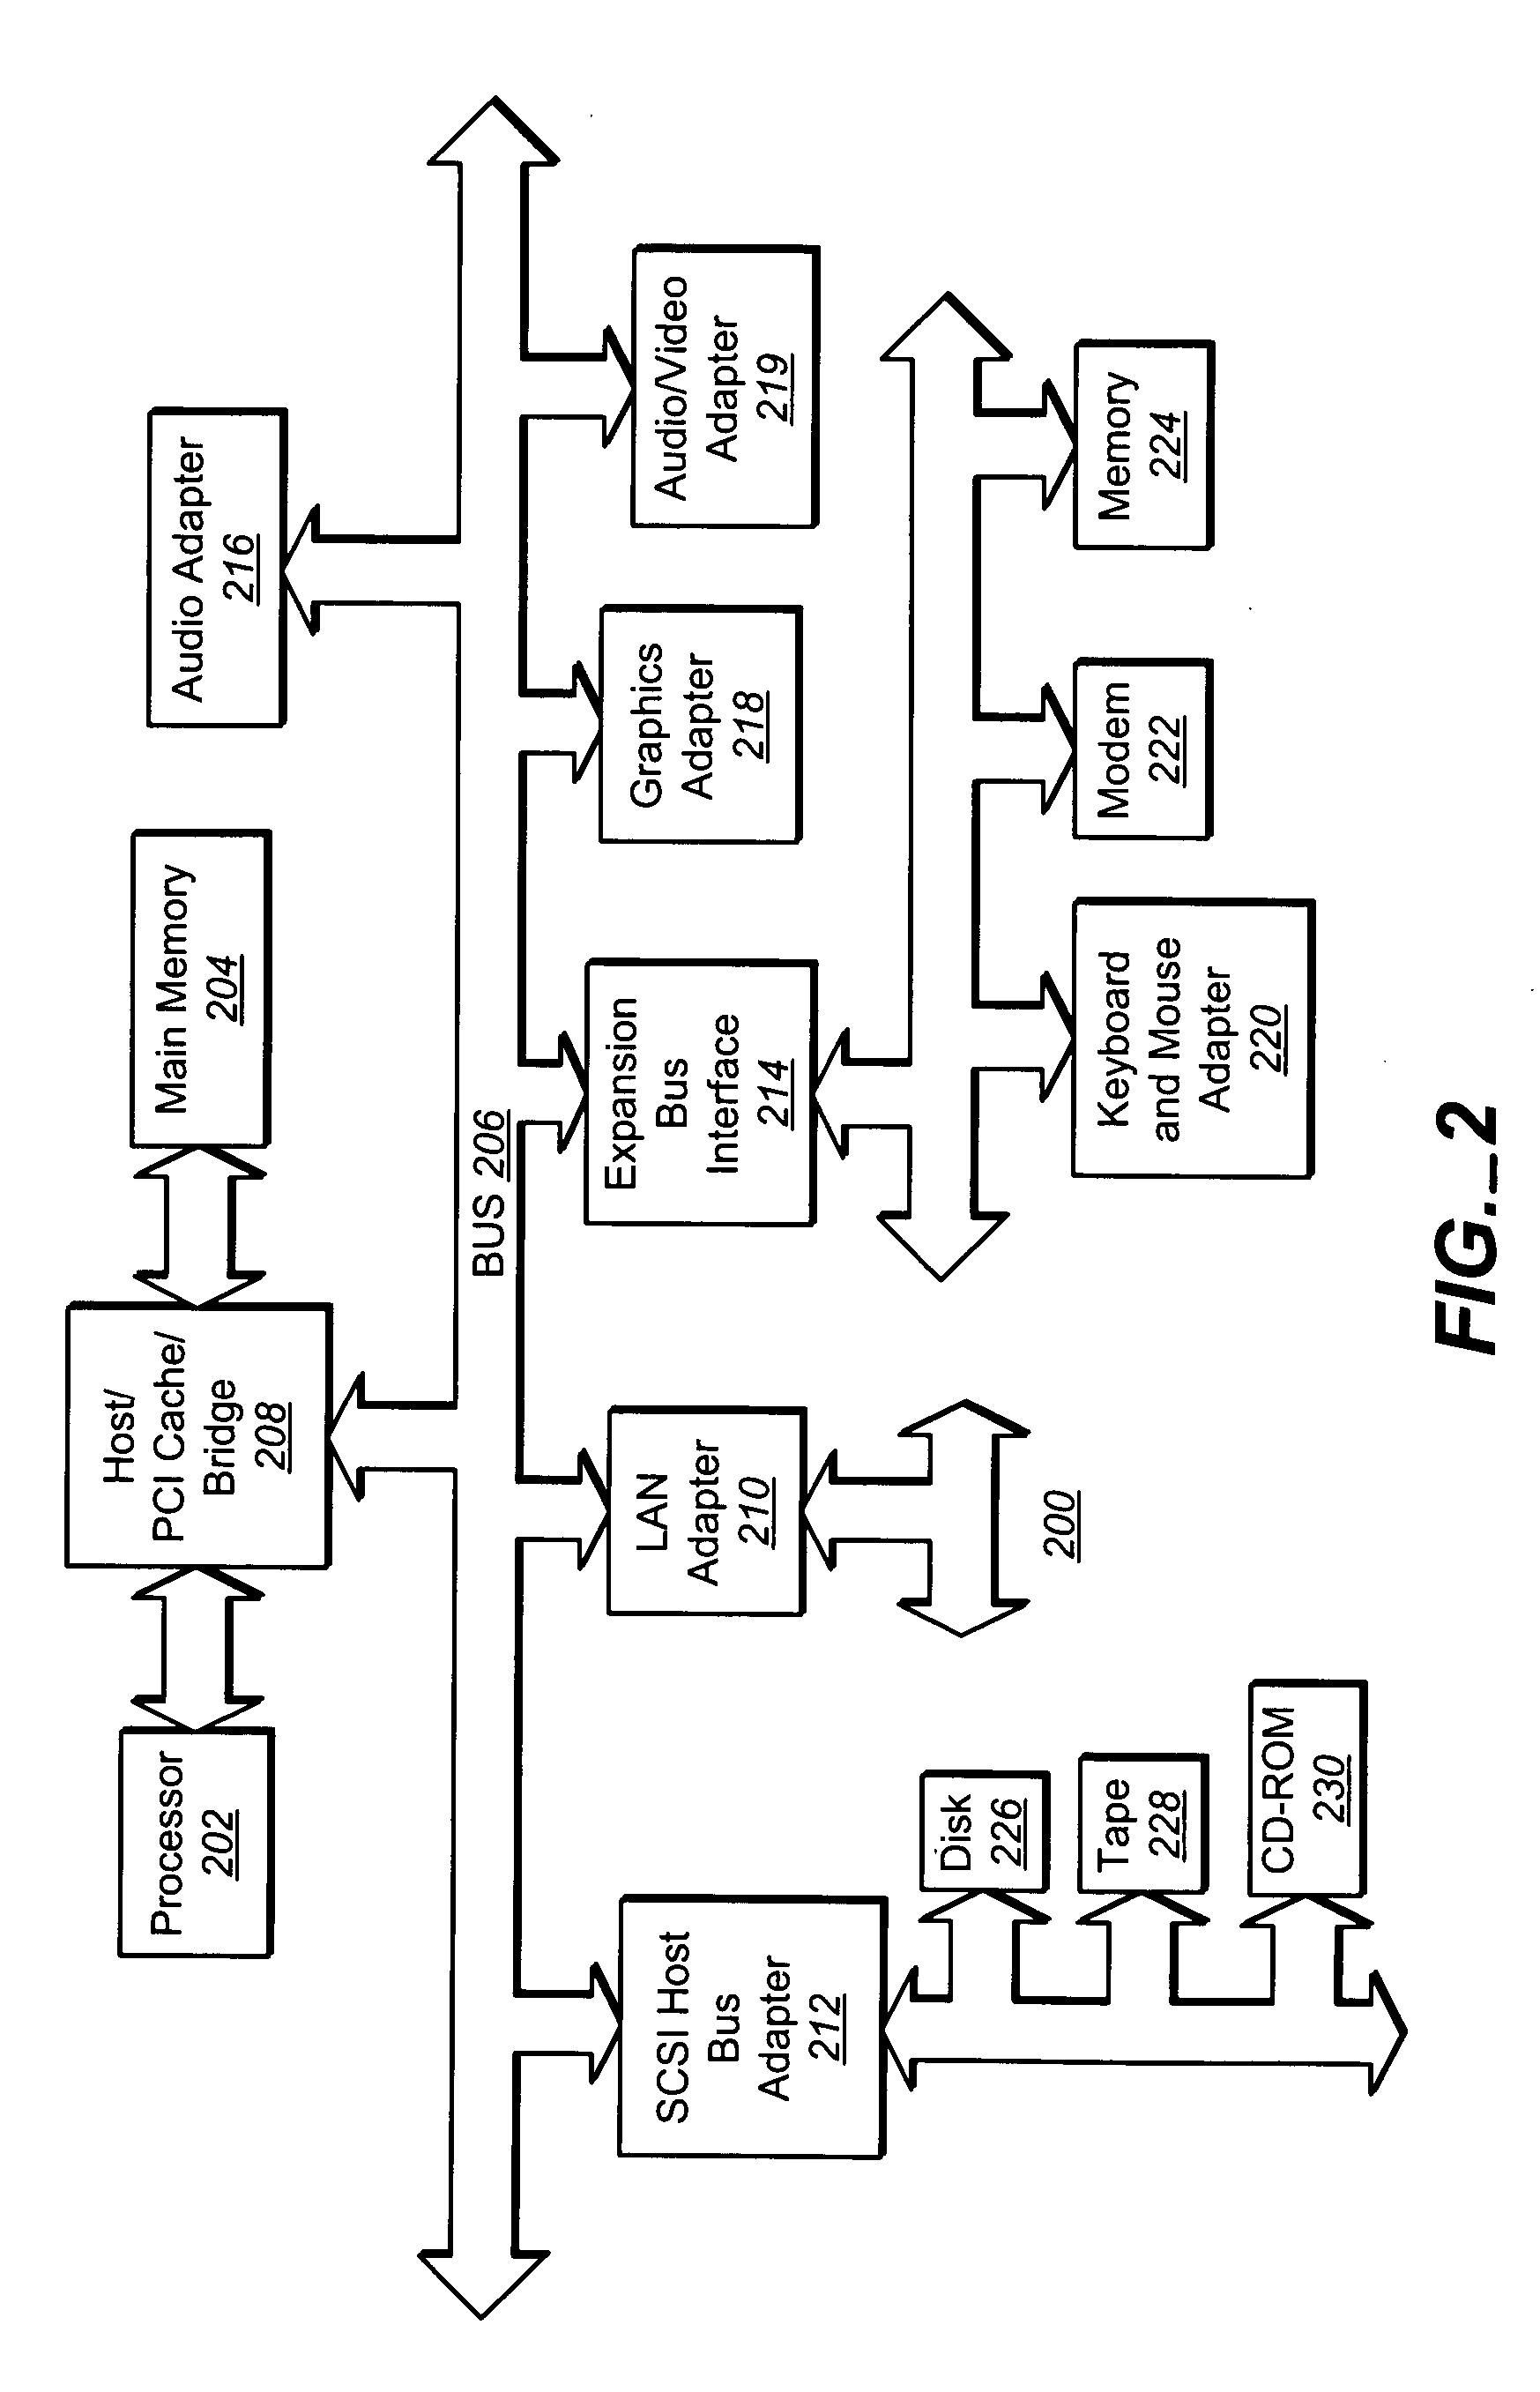 FIFO sub-system with in-line correction